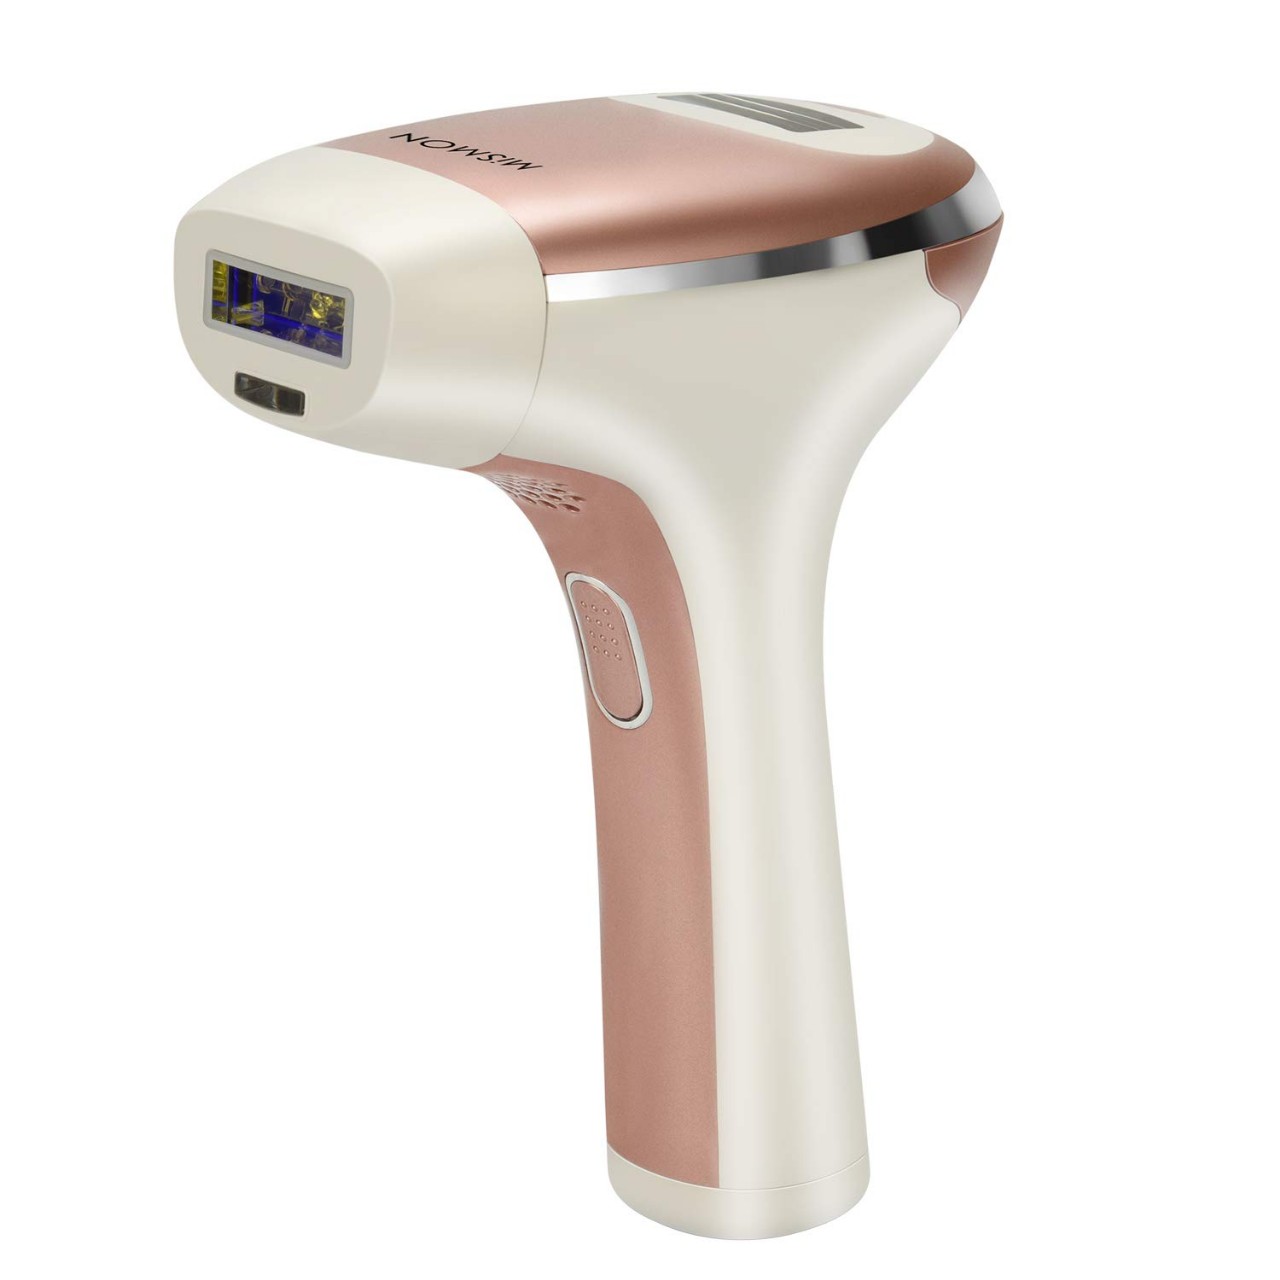 Laser Hair Removal For Women, MiSMON IPL Hair Removal Device for Men/Women Permanent Results on Face